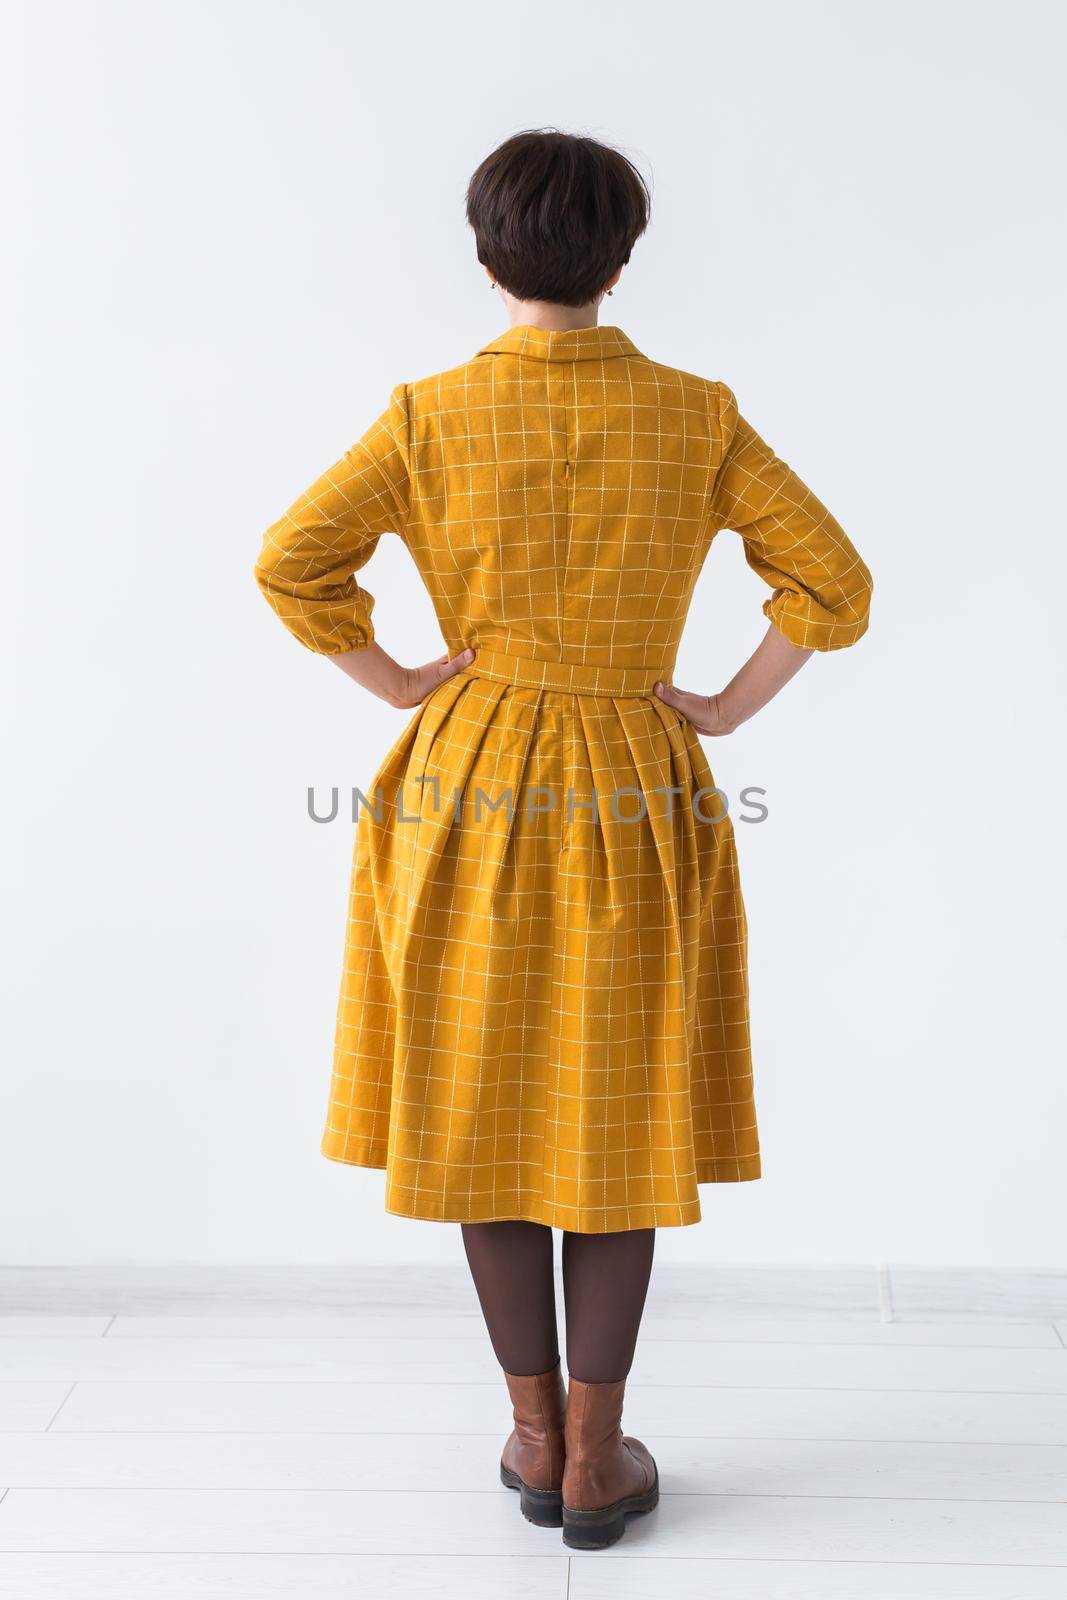 clothing, designer, people concept - back view of attractive woman in a yellow dress posing on white room. by Satura86